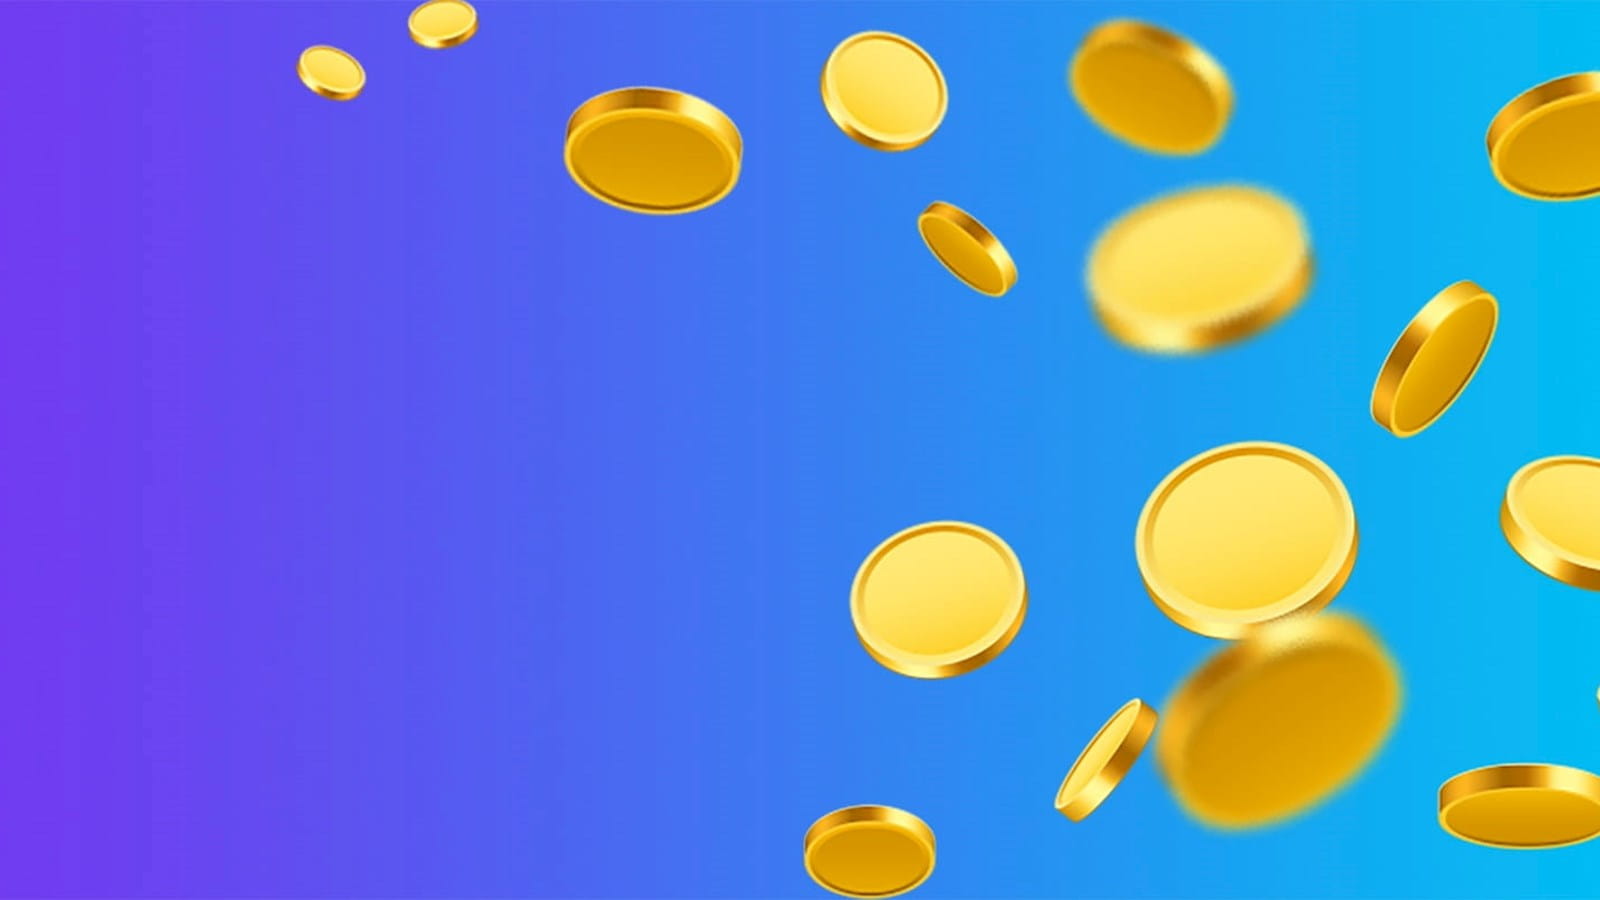 Falling coins image